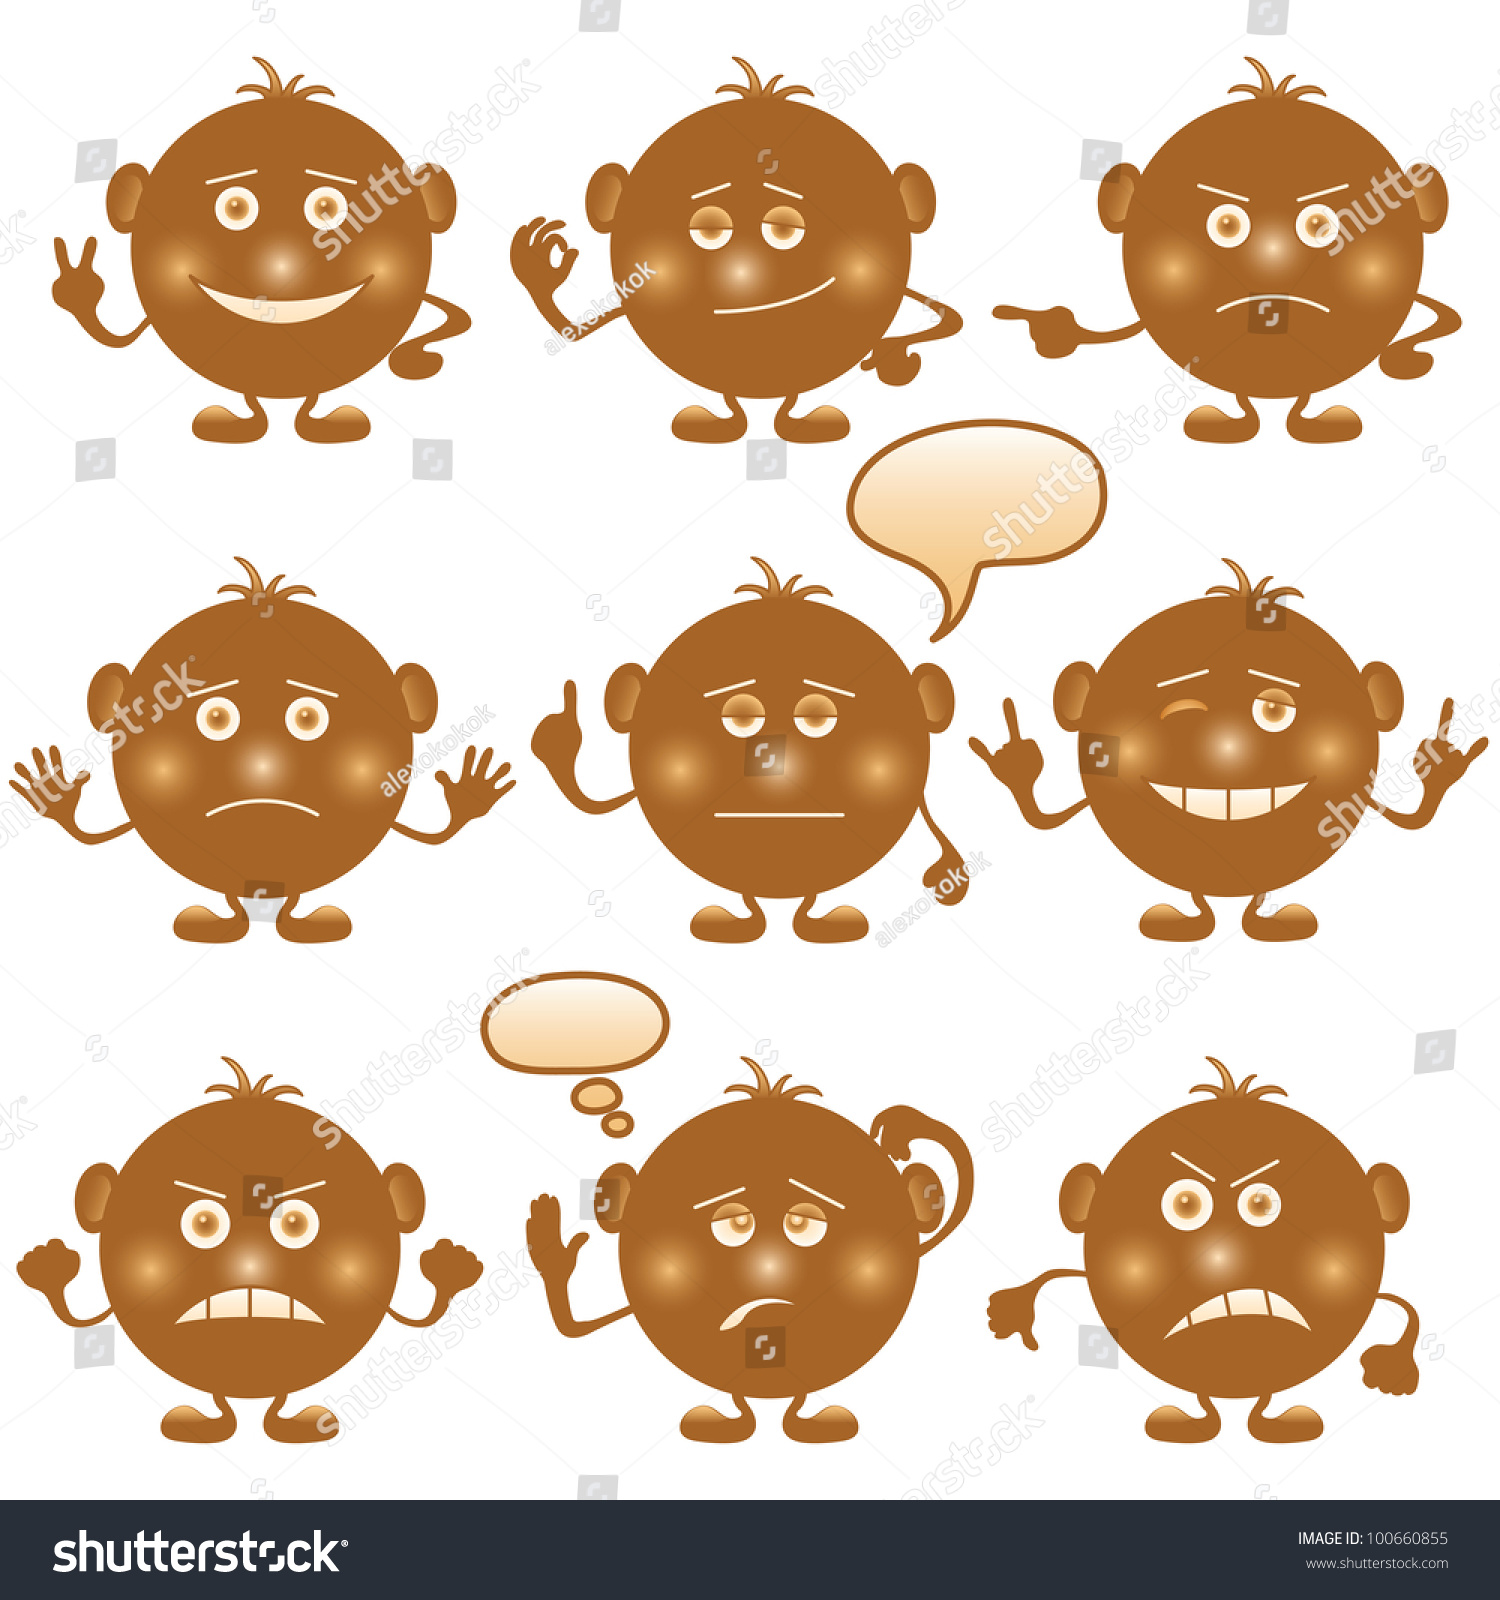 Smilies Symbolising Various Human Emotions Round Stock Vector Royalty